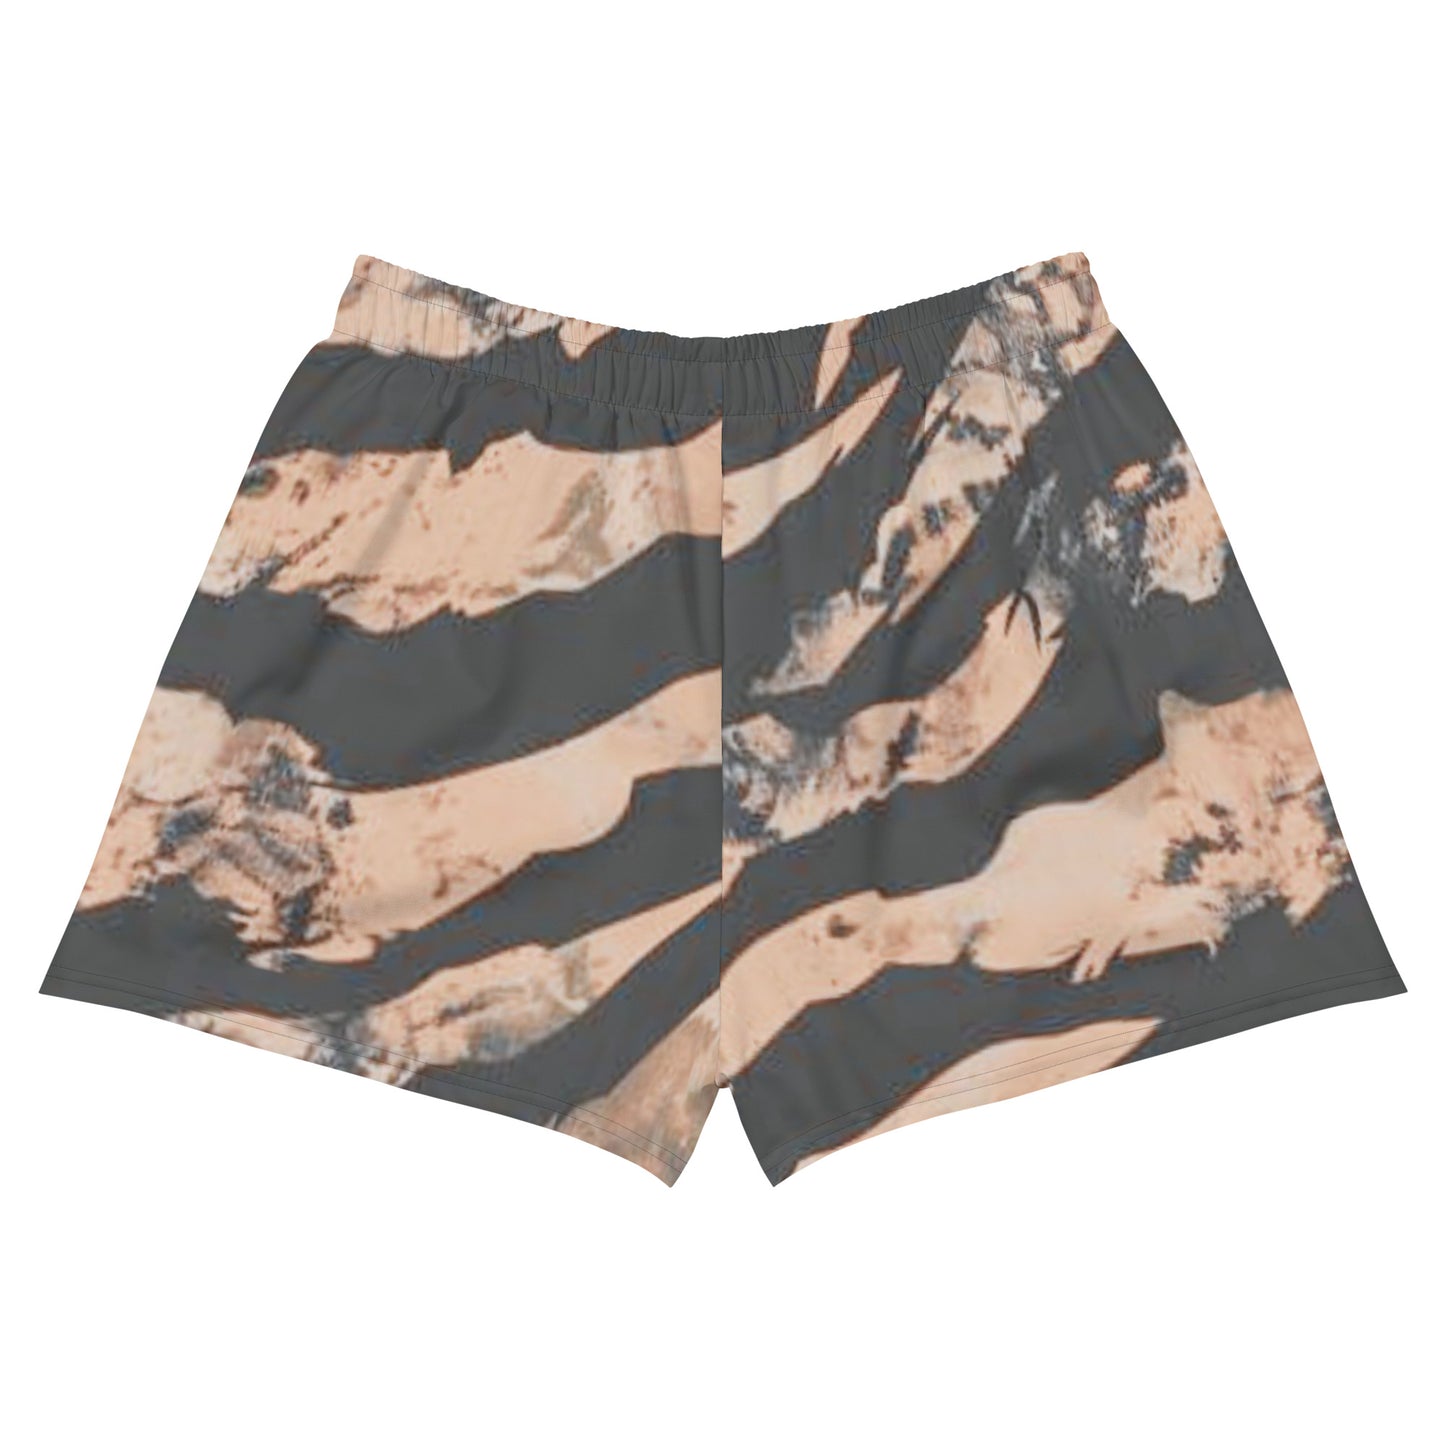 DH CHASE CAMO Athletic Shorts in Seashell